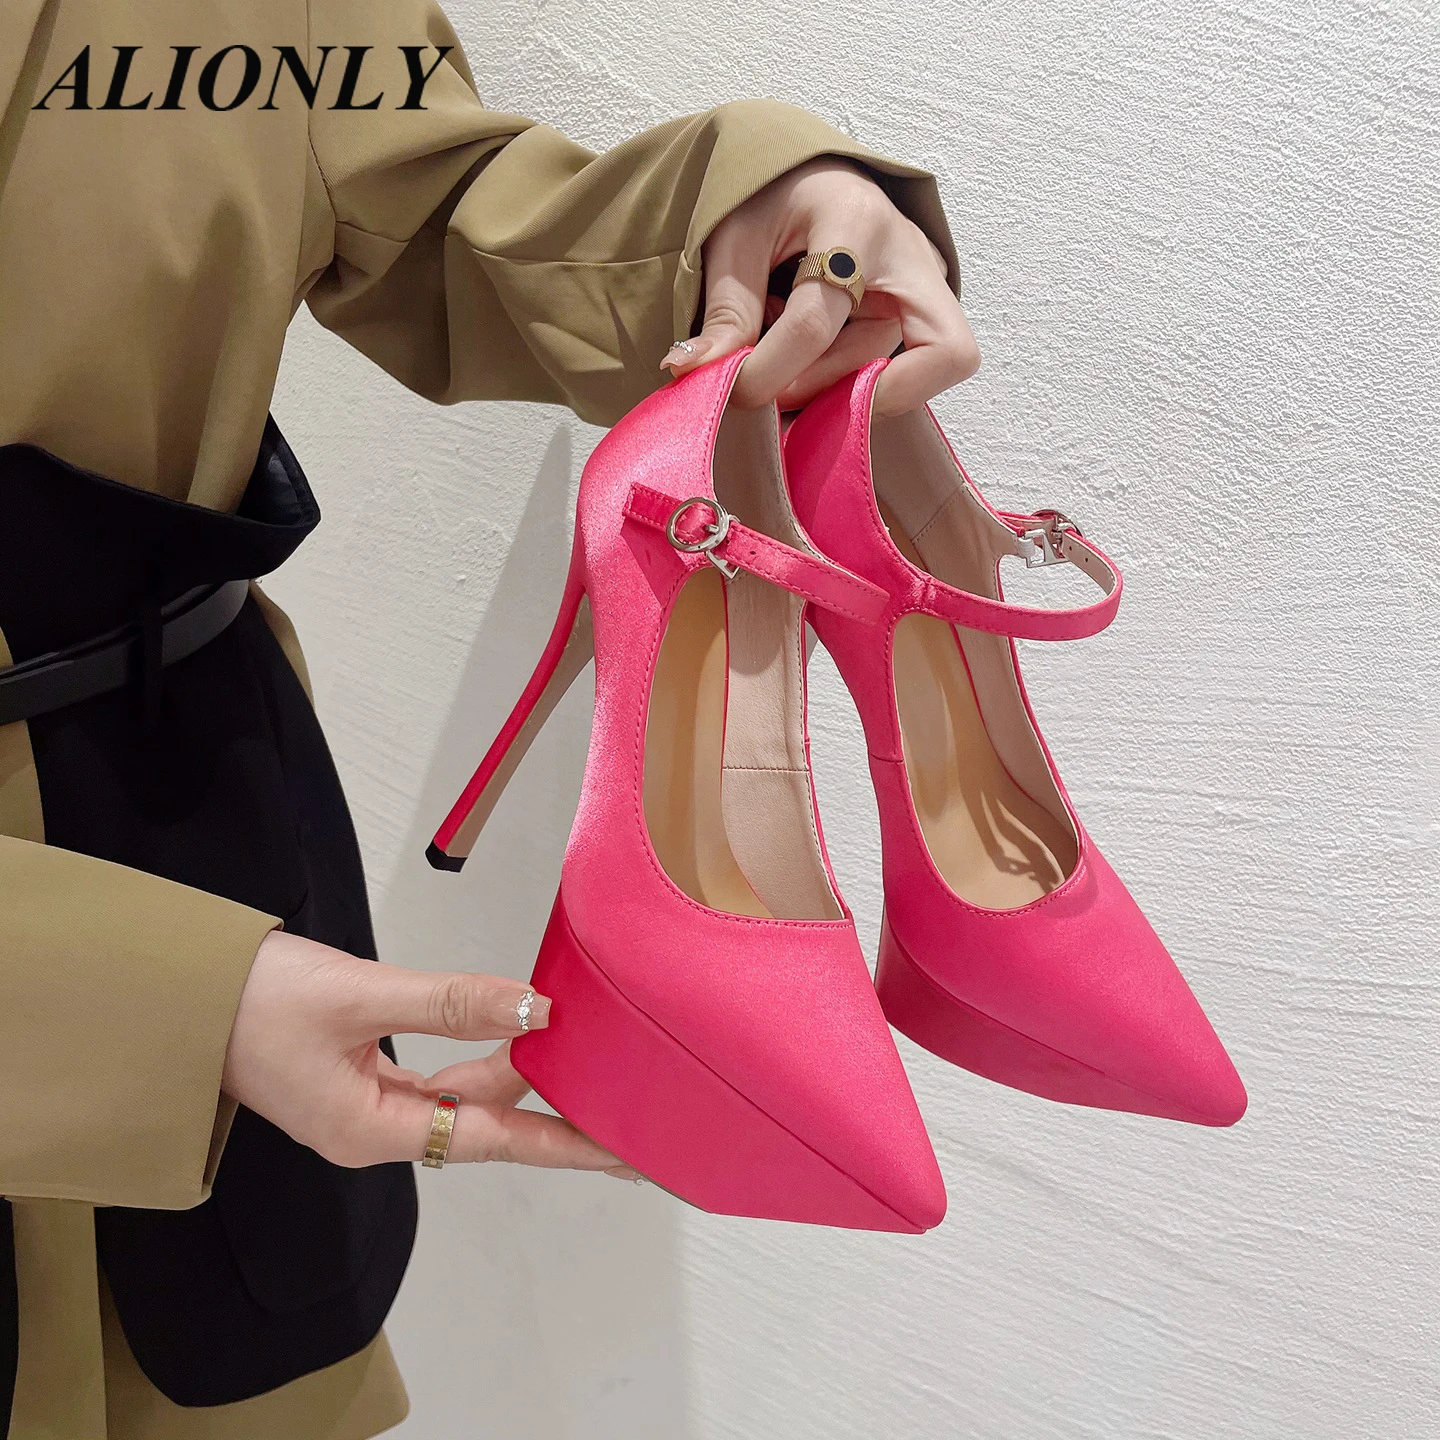 

Alionly 2023 New Nightclub High Heel Pointed Toe Stiletto Red Bottom Fashion Shoes For Women Shallow High Heels Chaussure Femme